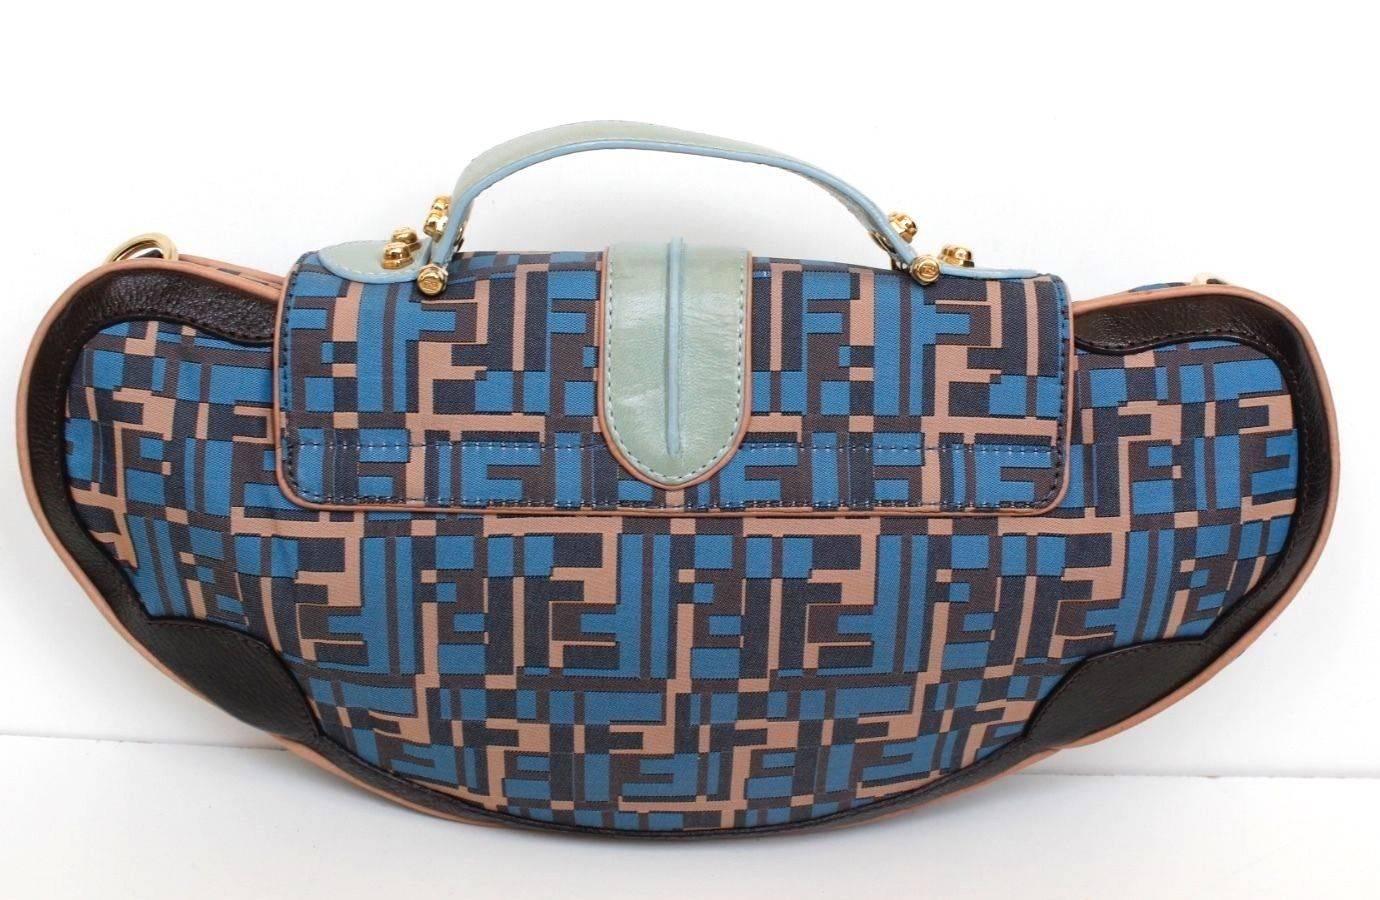 FENDI BLUE PINK LEATHER ZUCCA CANVAS VANITY CLUTCH BAG
This celebrity-loved Fendi Blue Zucca Canvas Vanity Clutch/Bag is the kind of bag we love to carry. 
It features a mix of Fendi Zucca print canvas with leather accents and a hinged leather